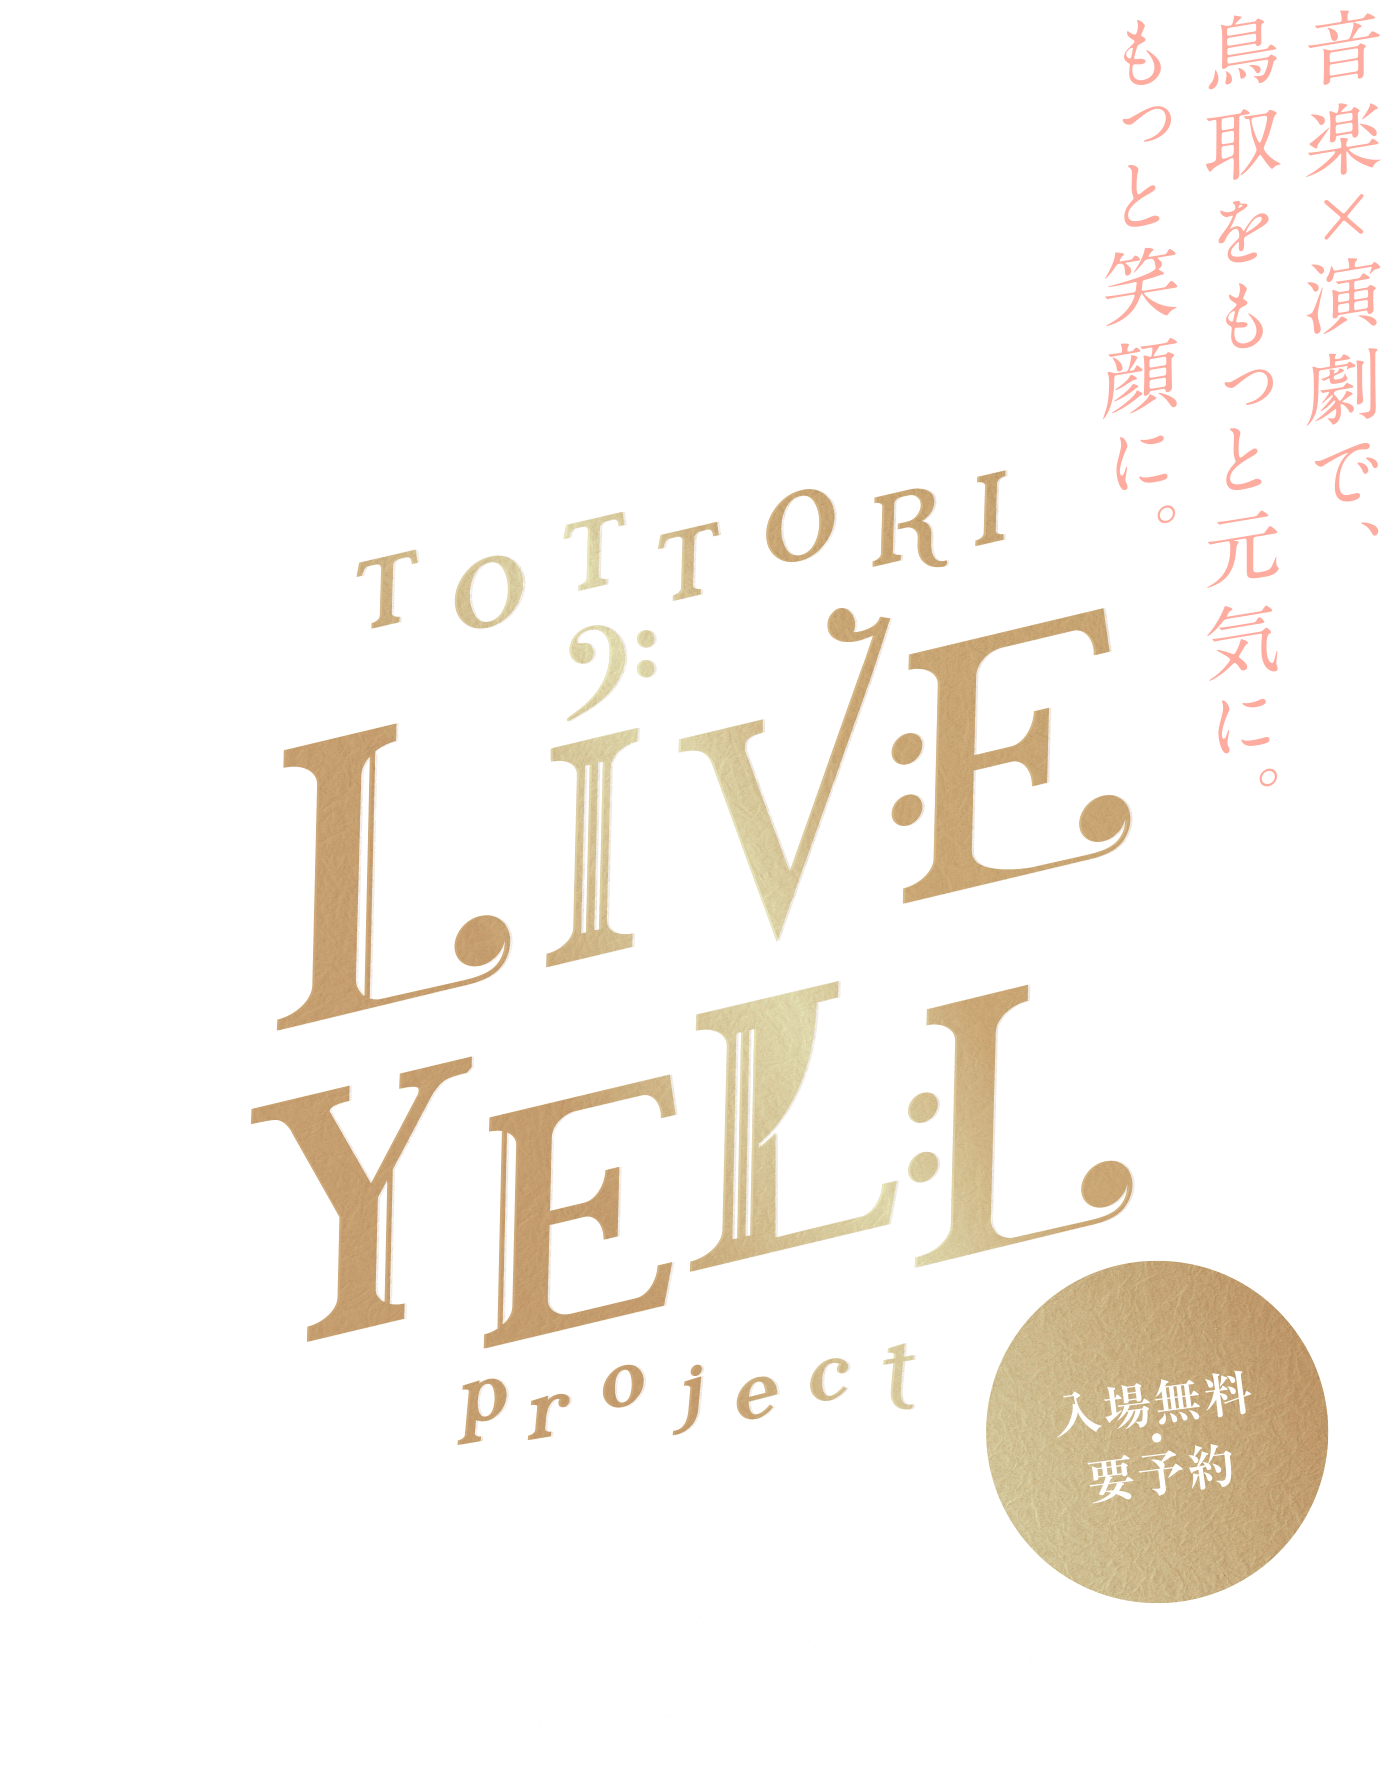 TOTTORI LIVE YELL Project